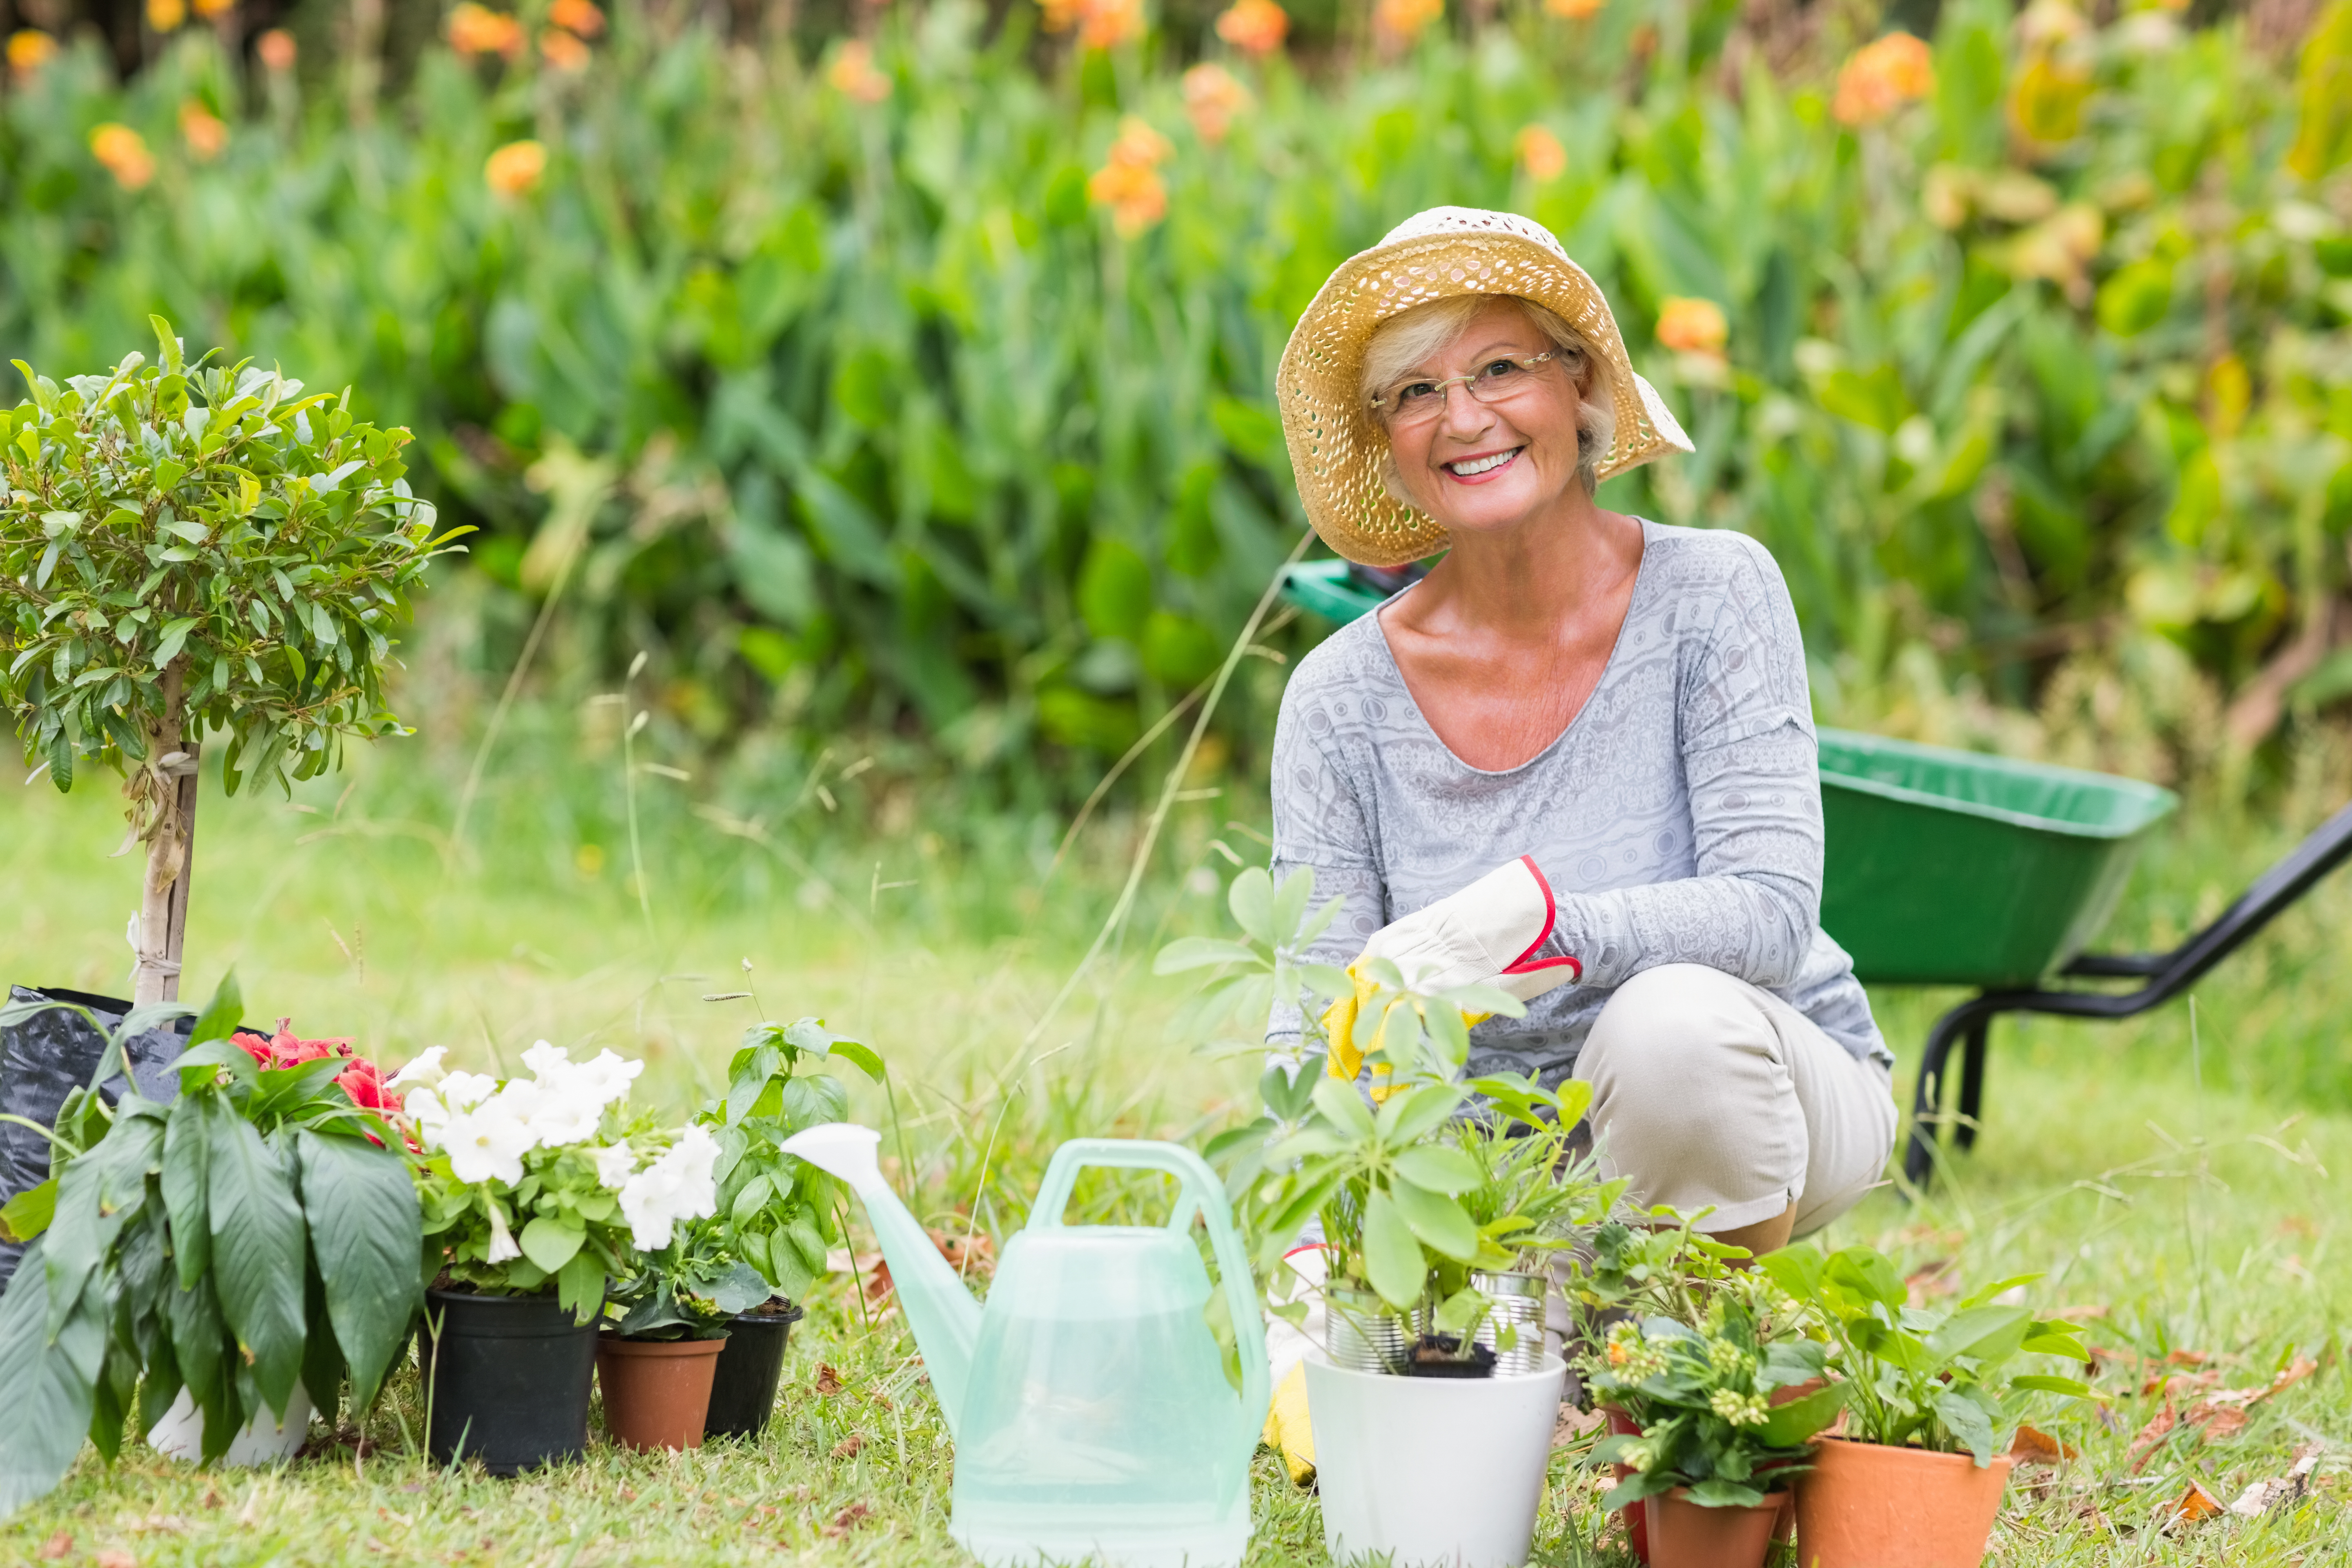 A smiling senior woman pictured while gardening | Source: Shutterstock